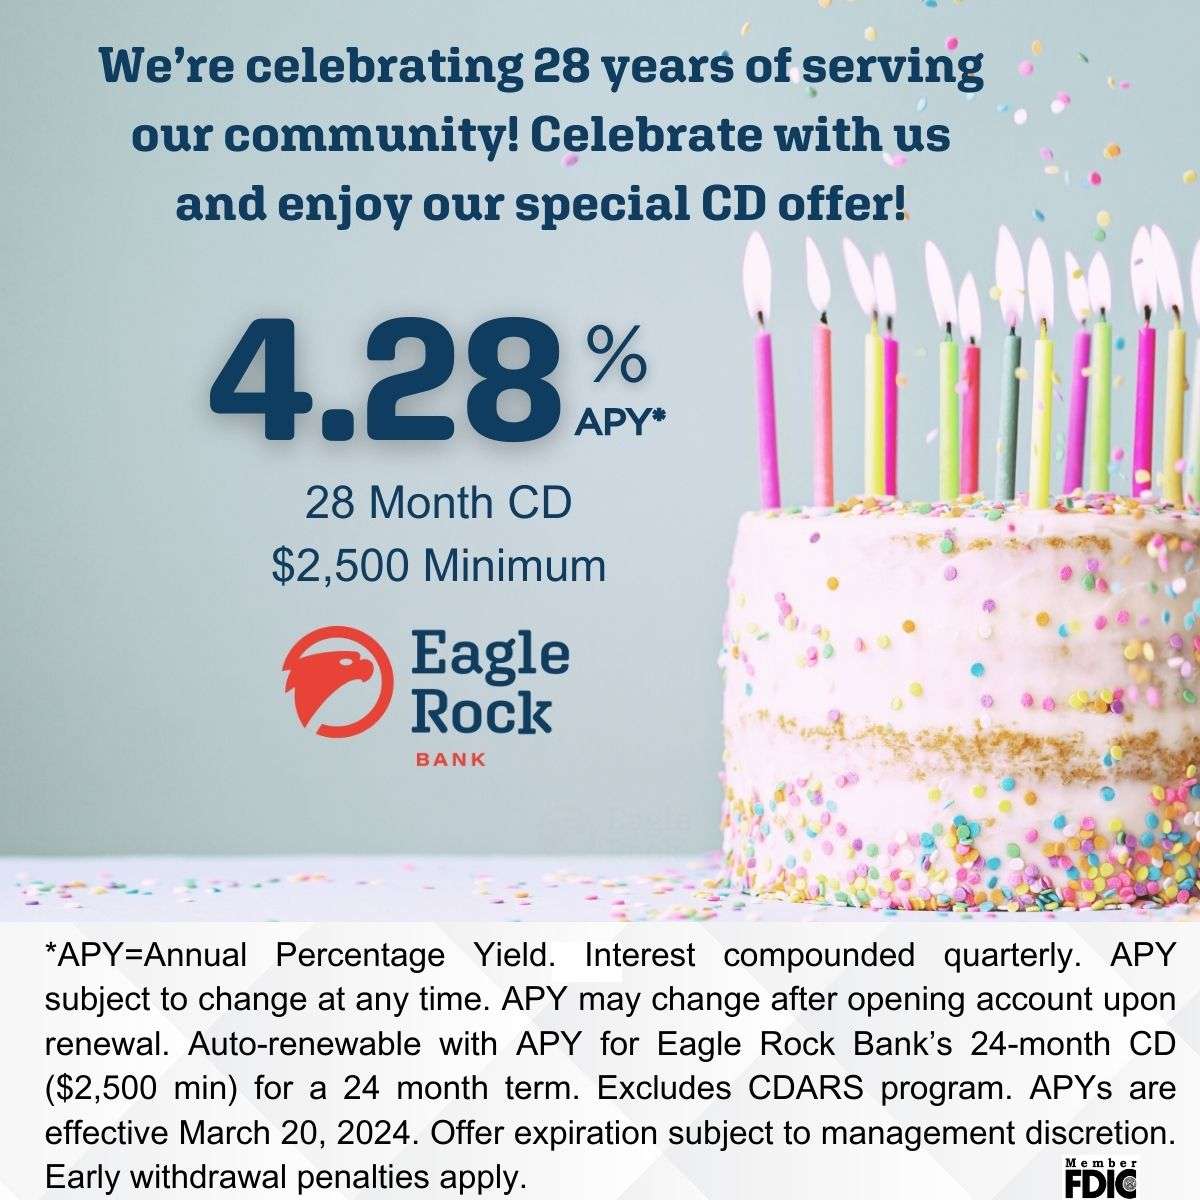 We're Celebrating 28 Years with a CD Special!